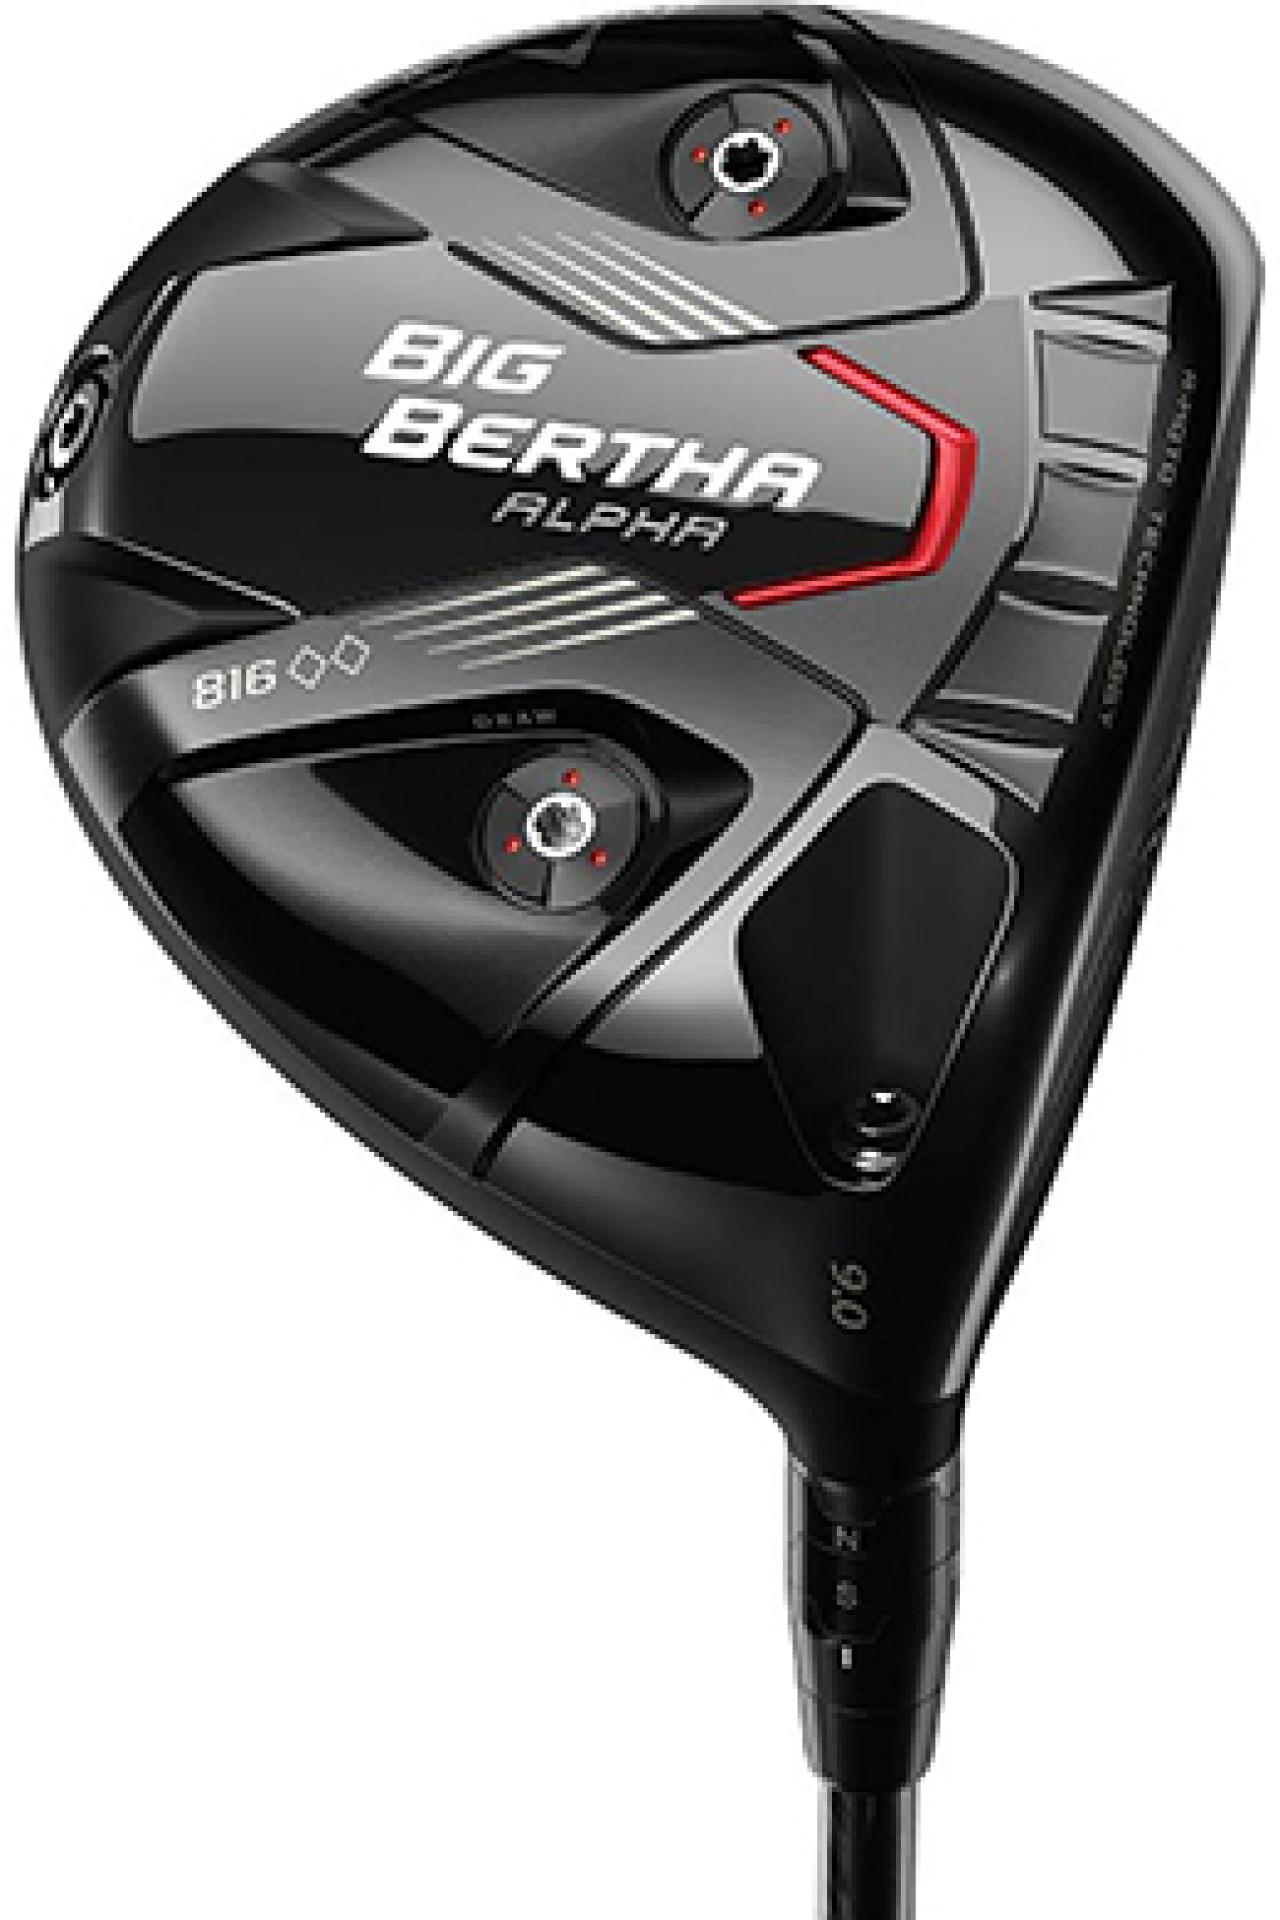 Callaway expands adjustability with new Great Big Bertha and 816